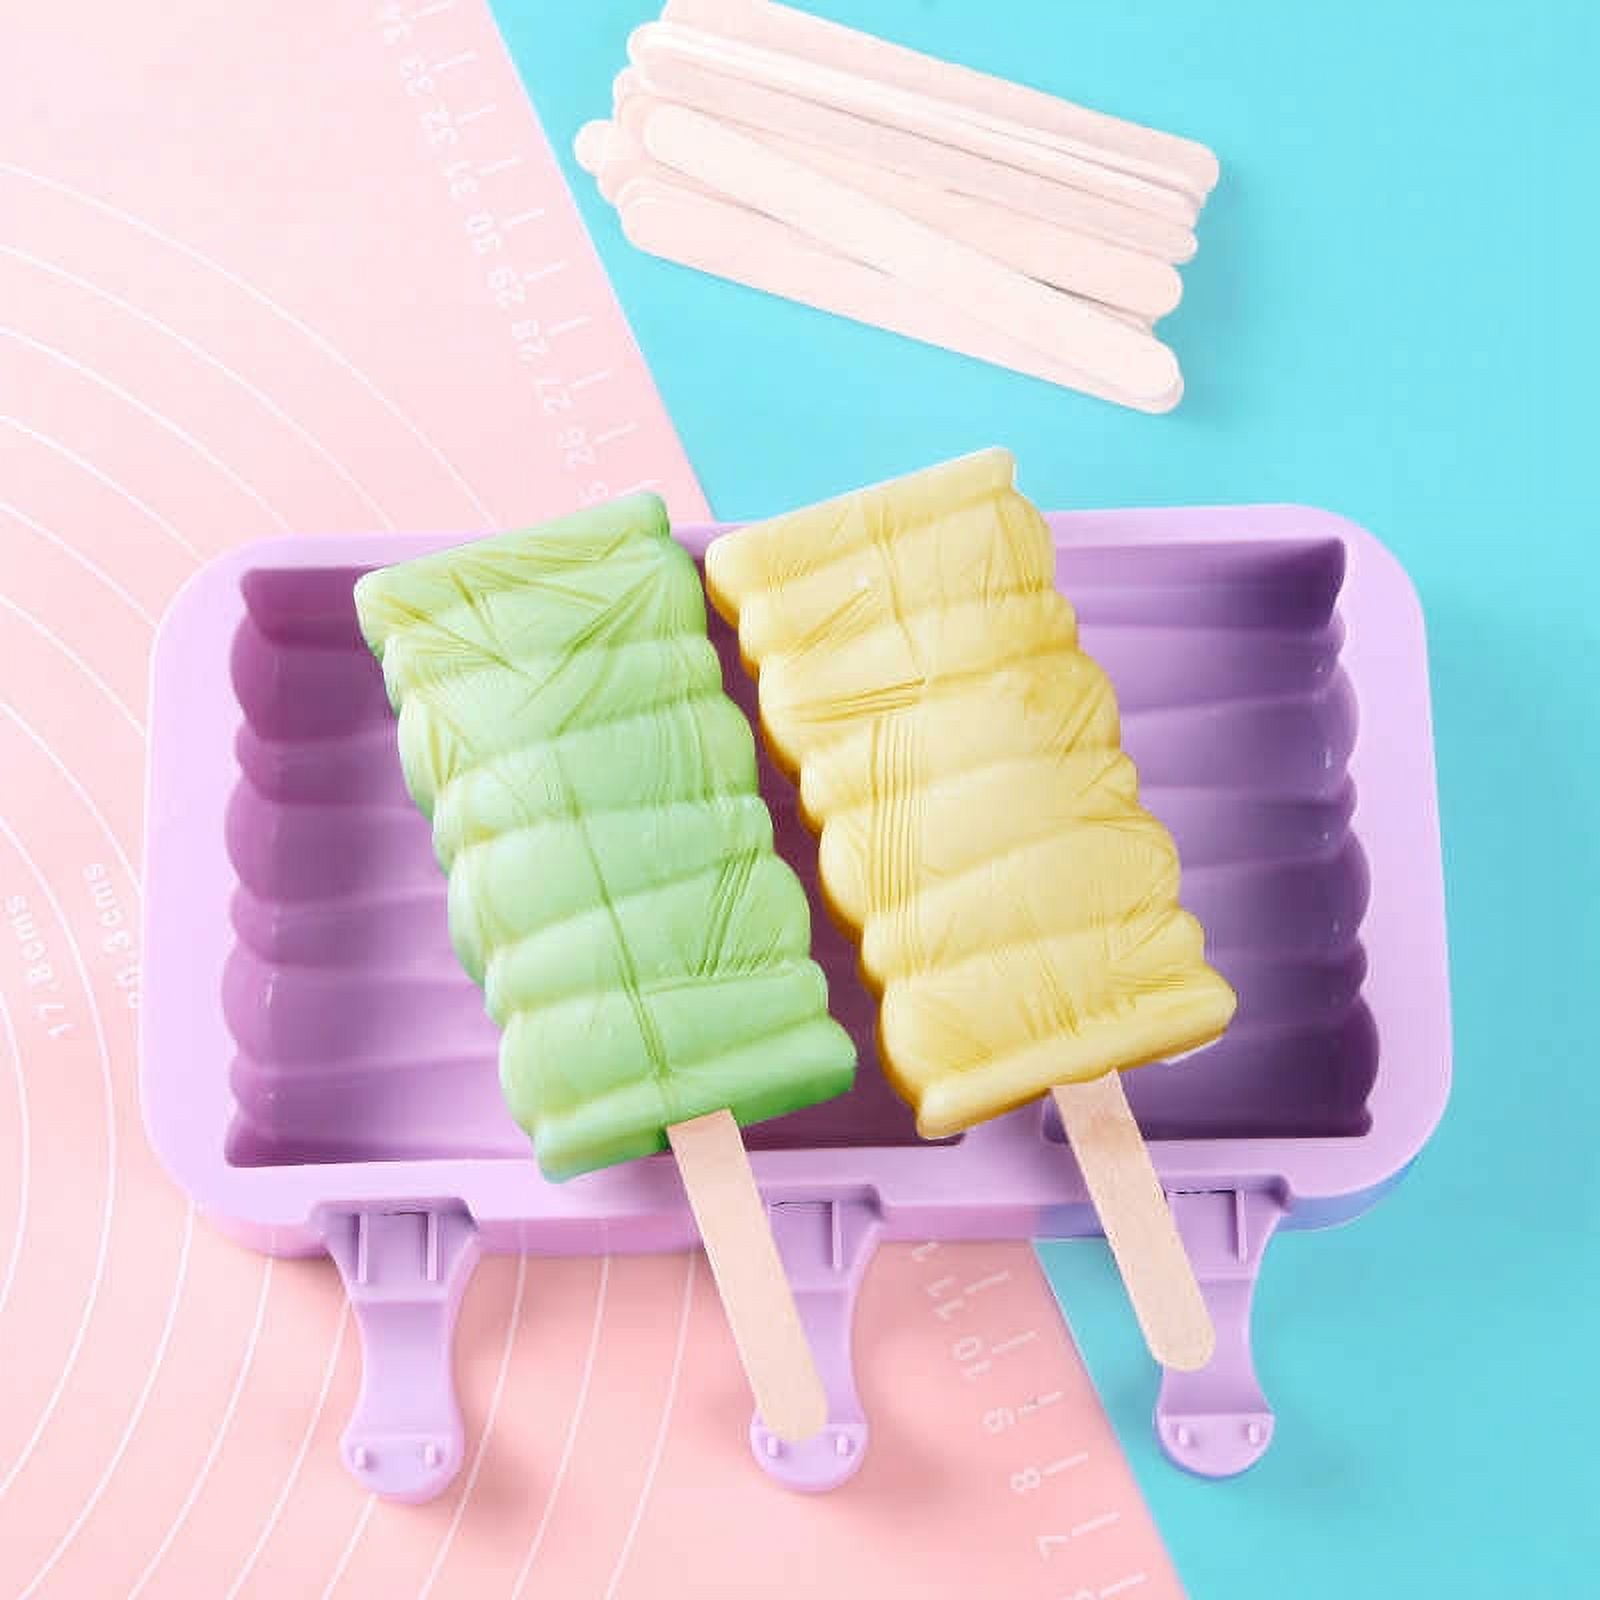 Waybesty Popsicles molds, 12 Pieces Silicone Popsicle Maker Molds Food  Grade Ice Pop Mold for ice cream 50 popsicle sticks 50 popsicle bag (12